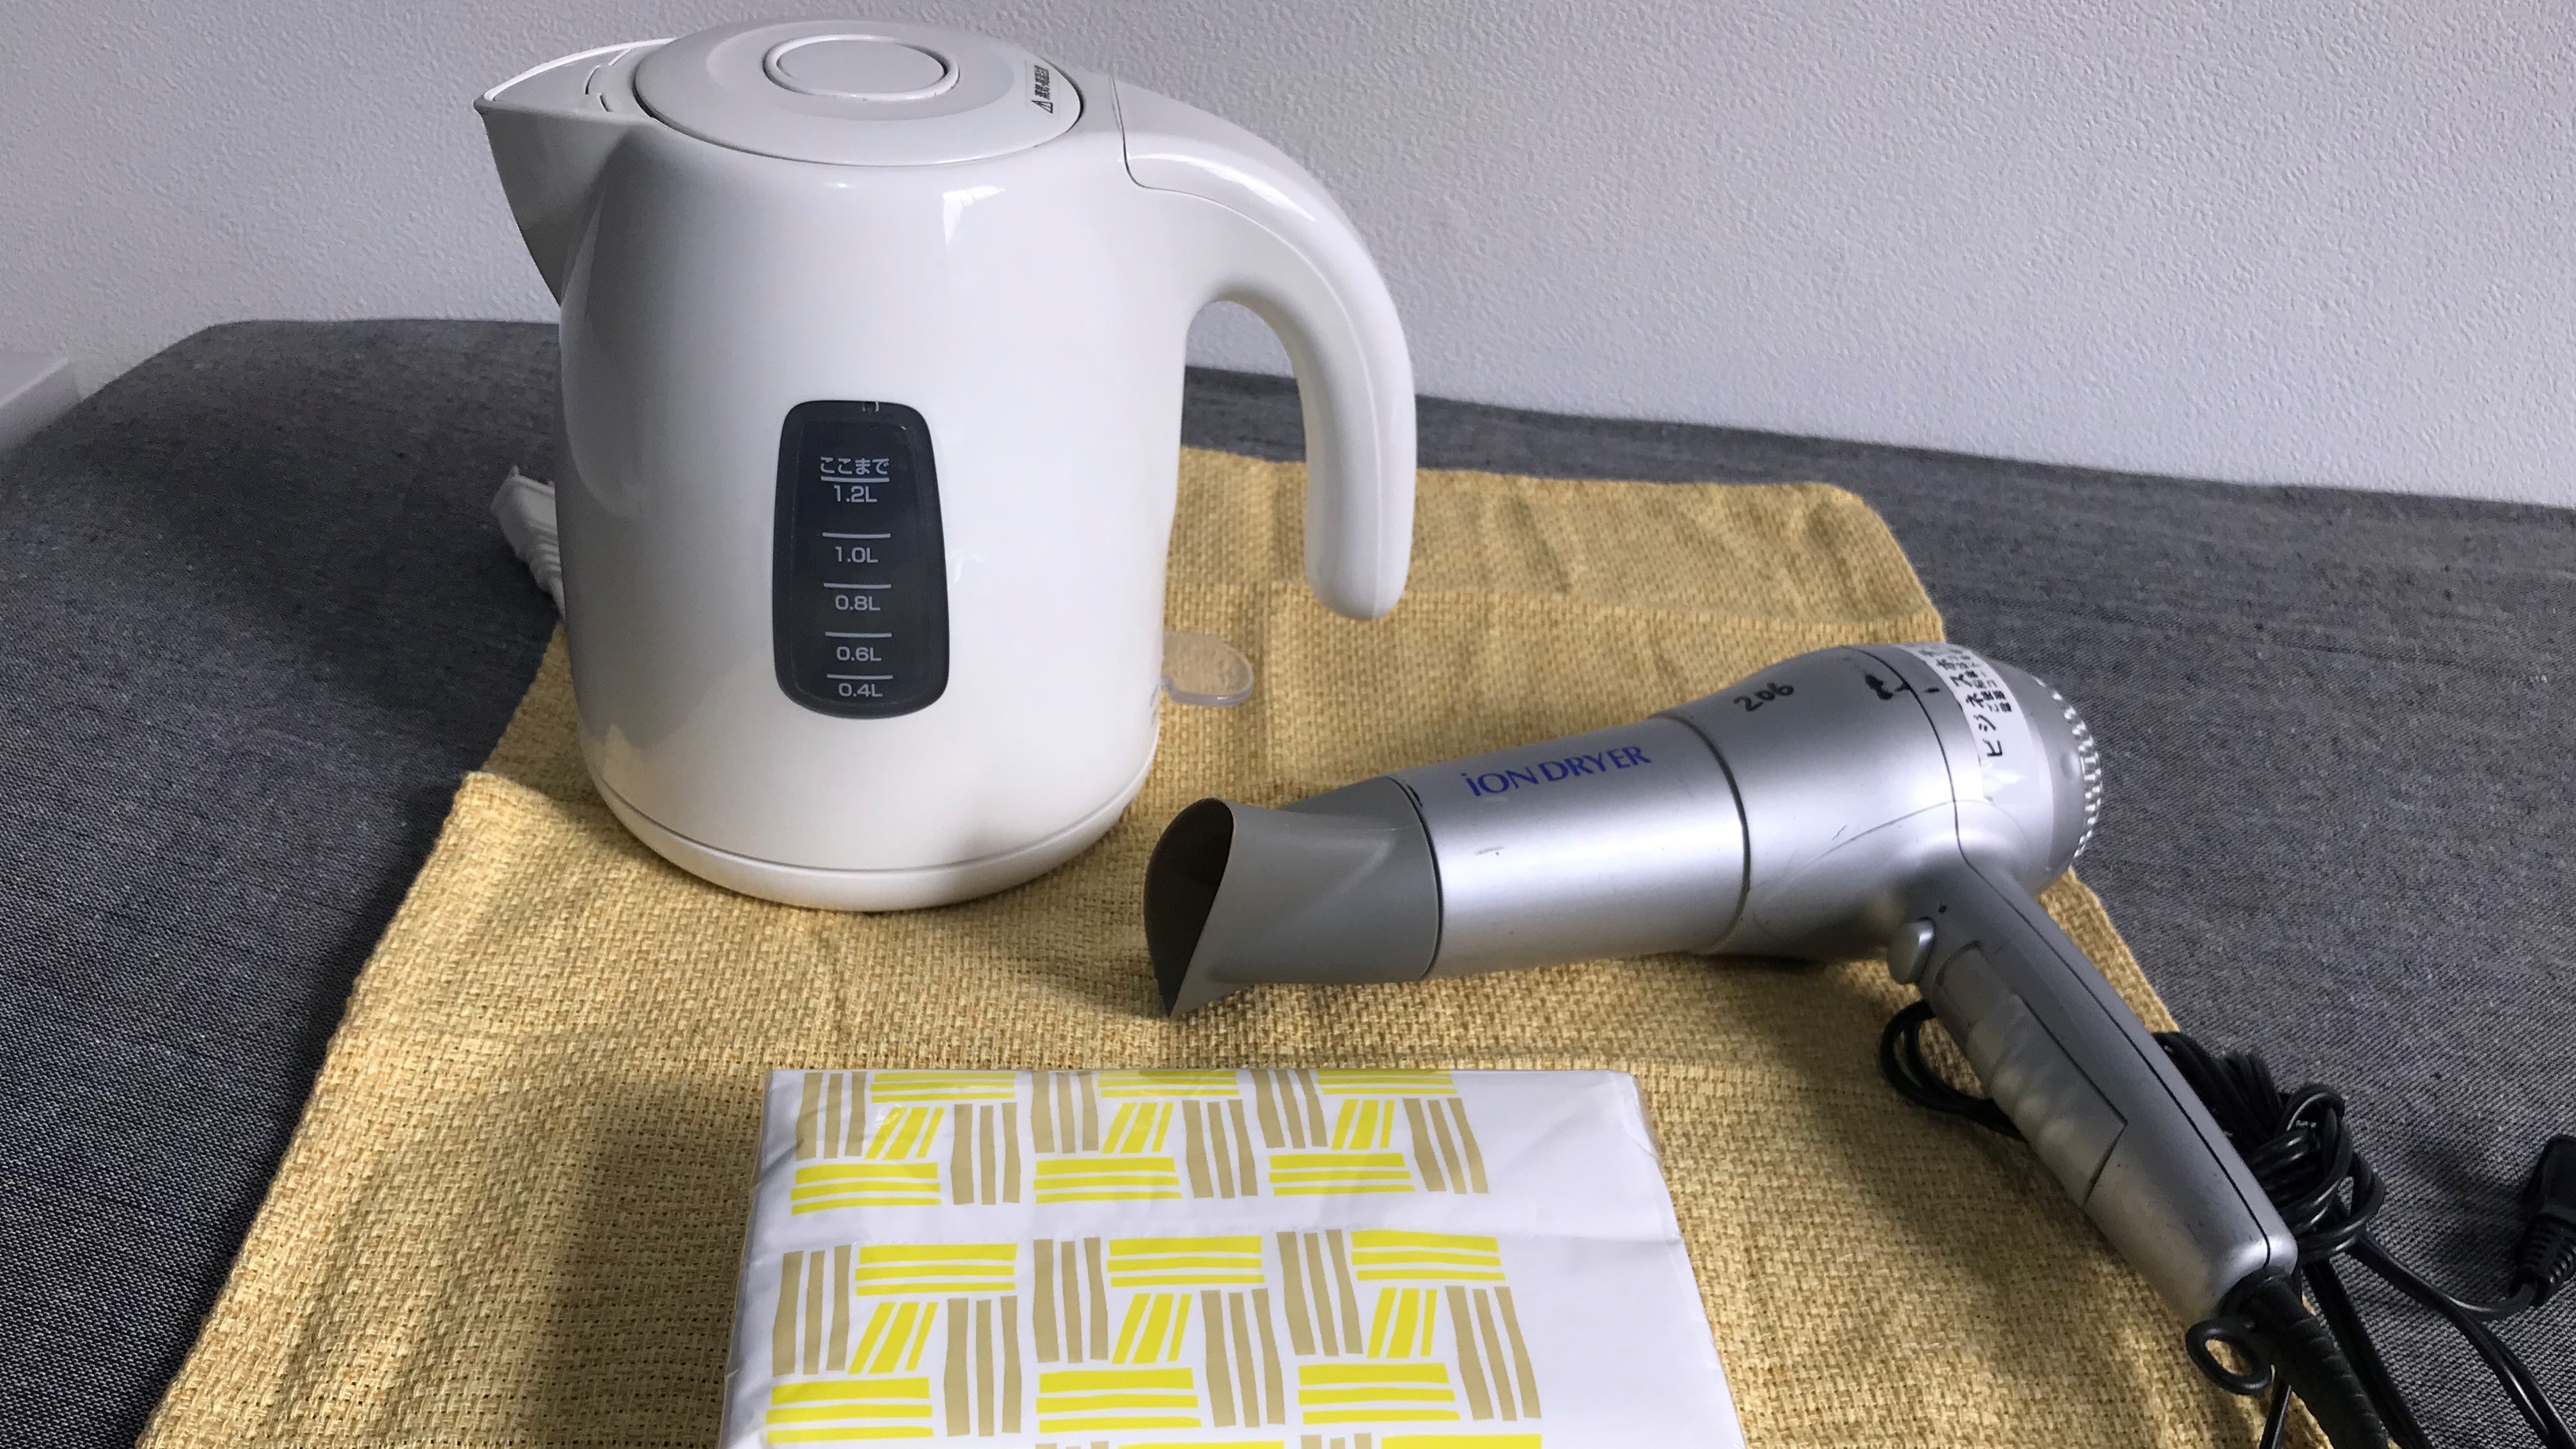 Equipment (electric kettle, dryer, tissue paper)